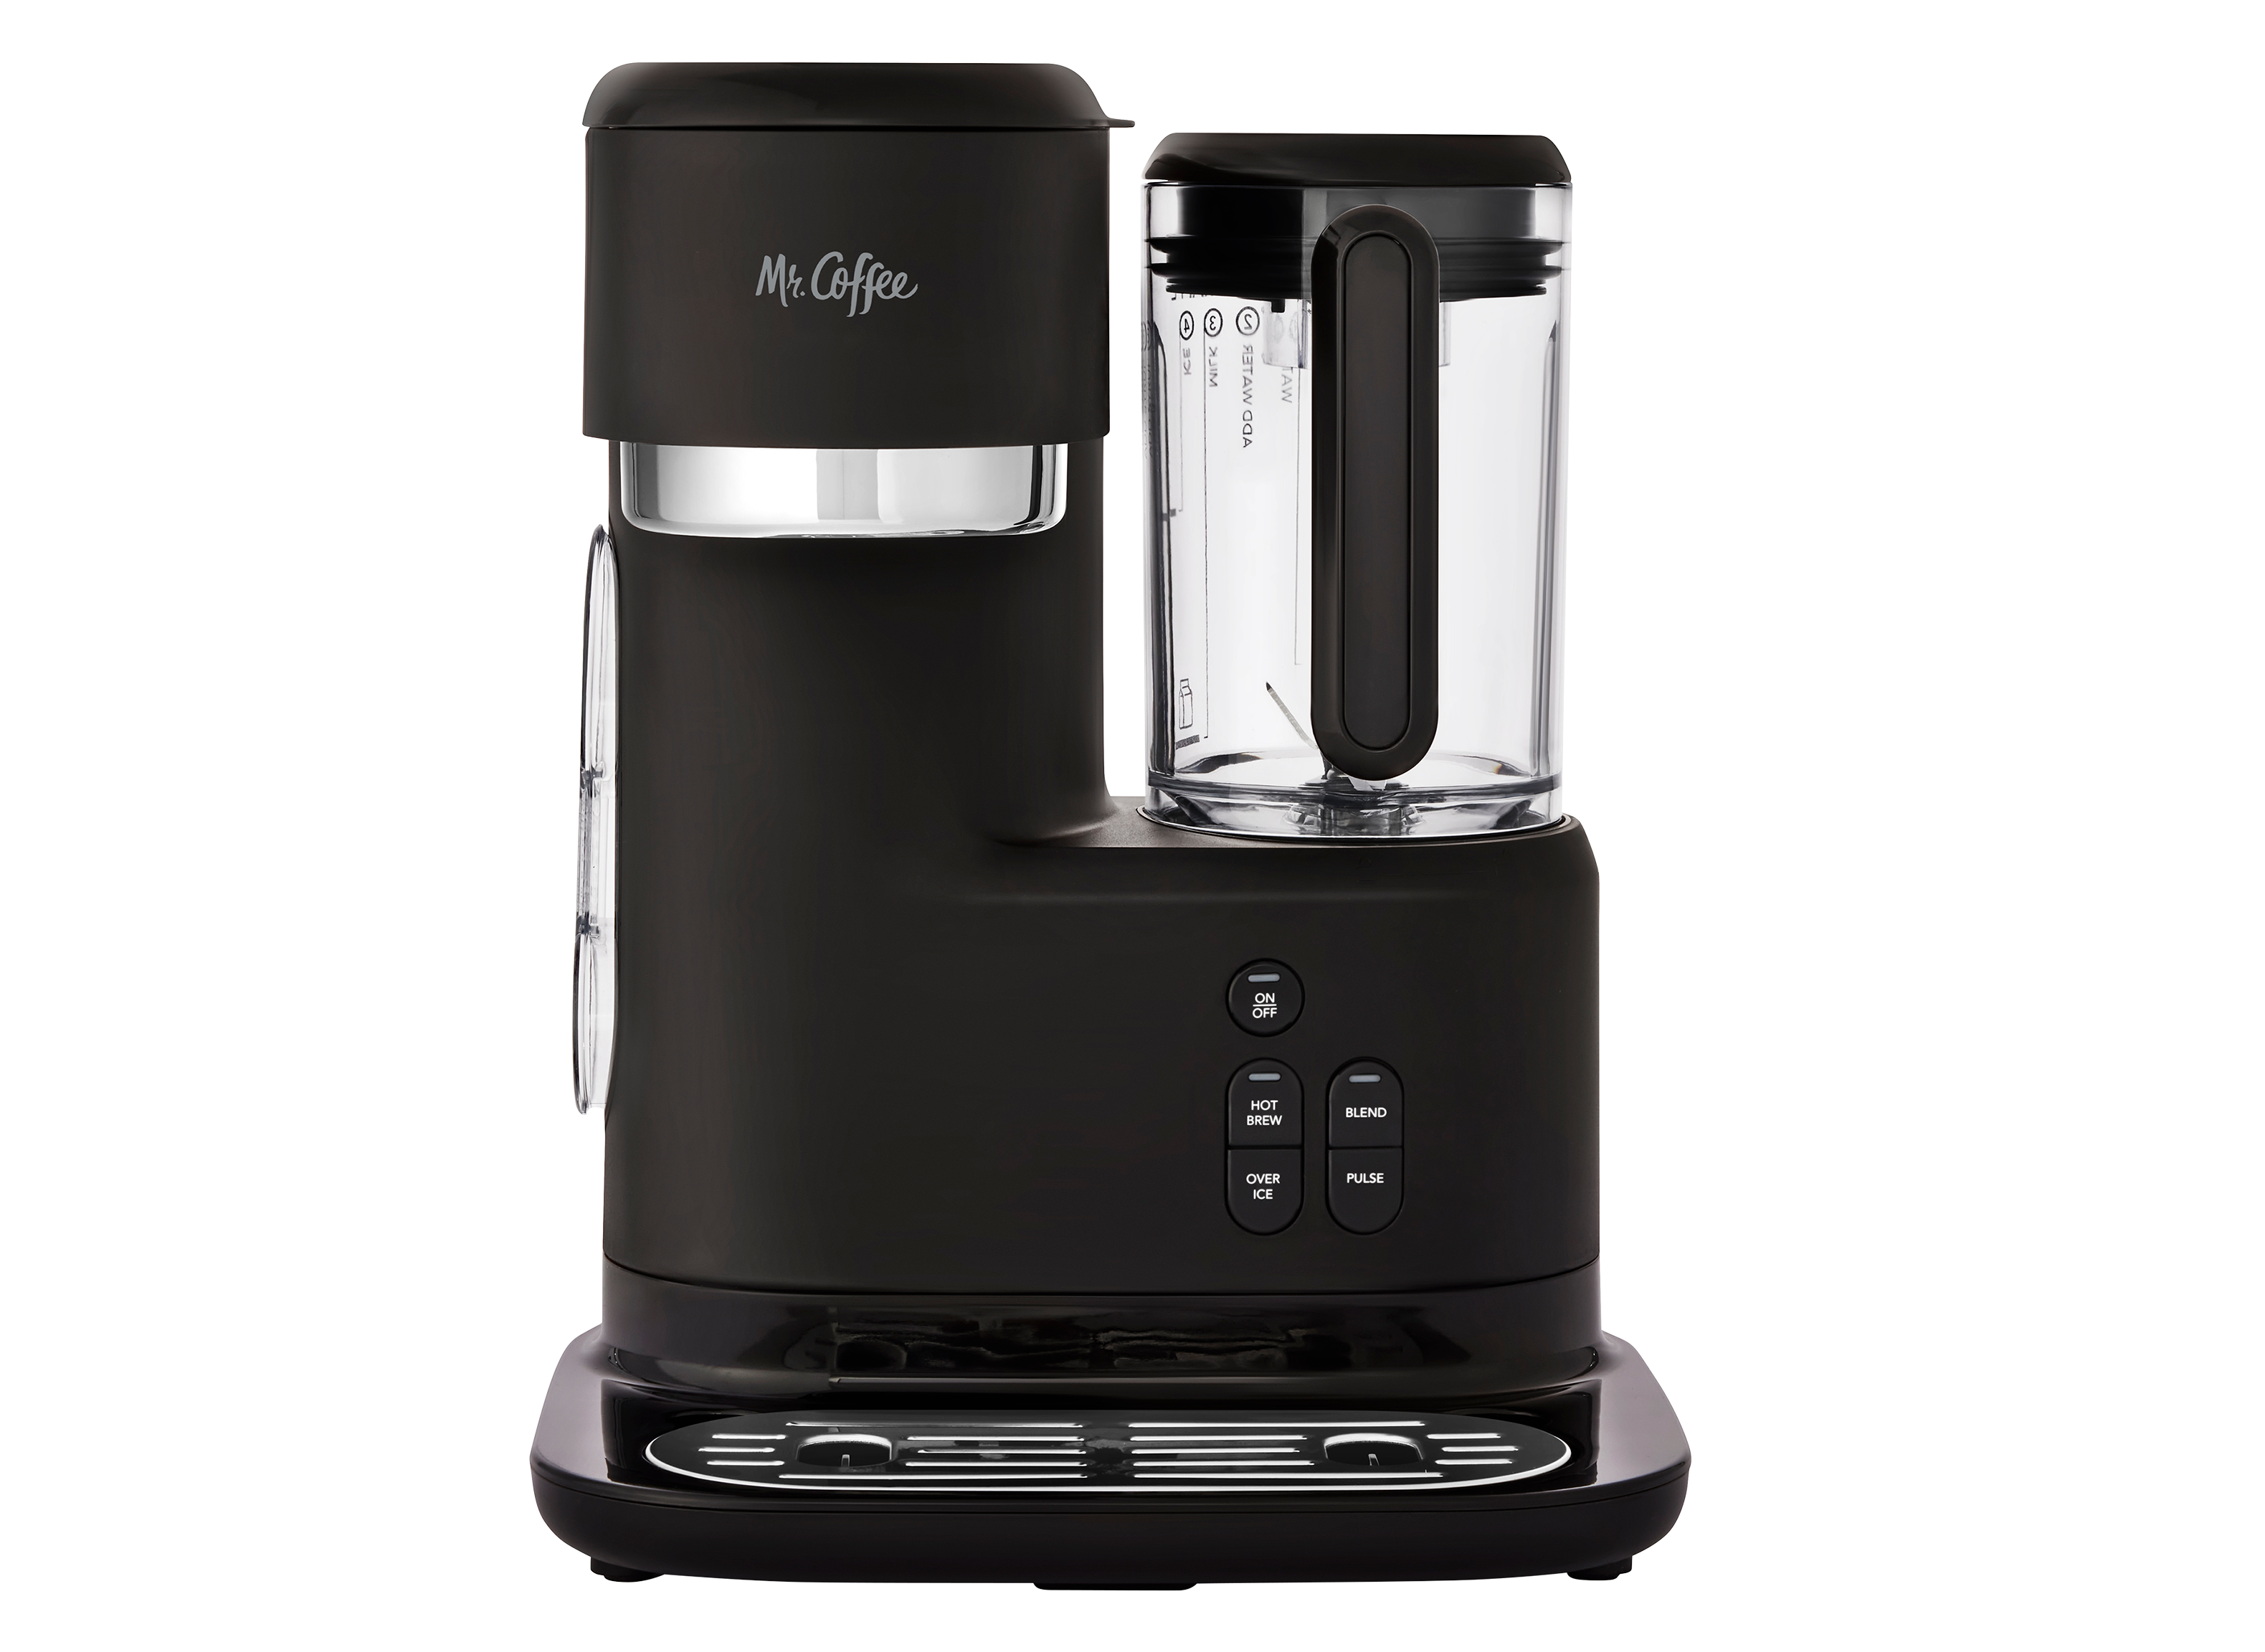 https://crdms.images.consumerreports.org/prod/products/cr/models/406304-drip-coffee-makers-with-carafe-mr-coffee-single-serve-frappe-iced-and-hot-10029218.png